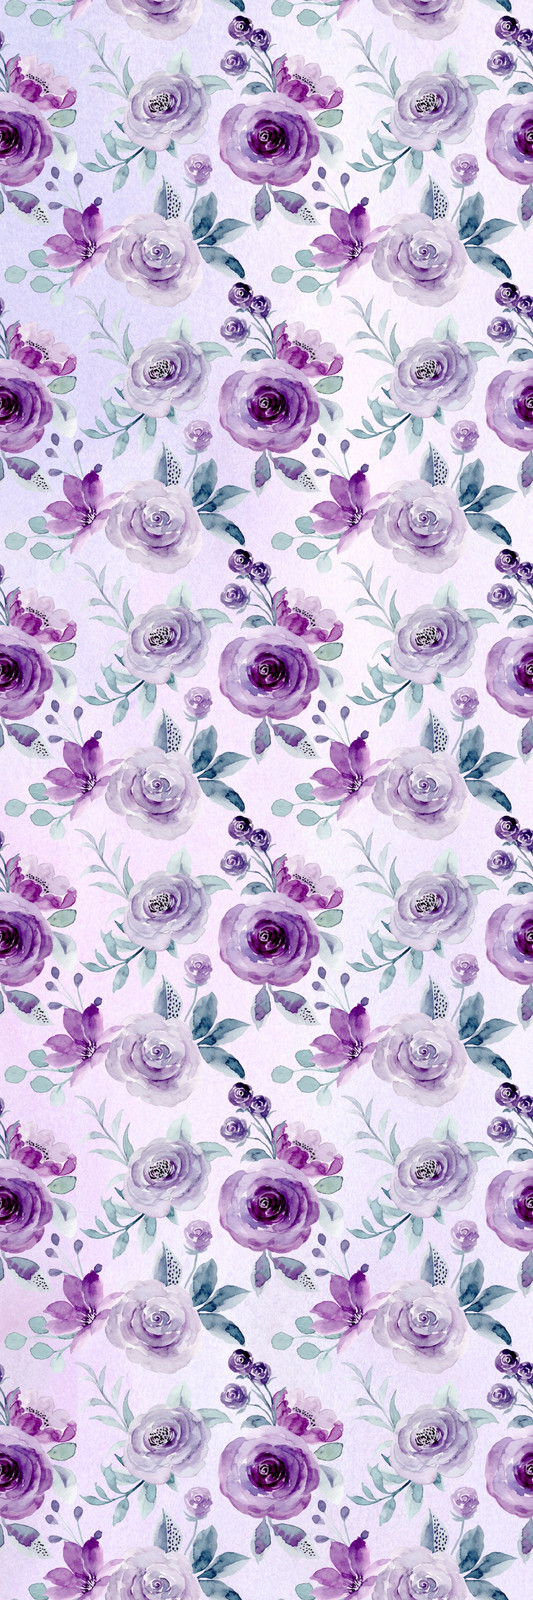 Spring Summer Floral Seamless Pattern Graphic by Flora Co Studio